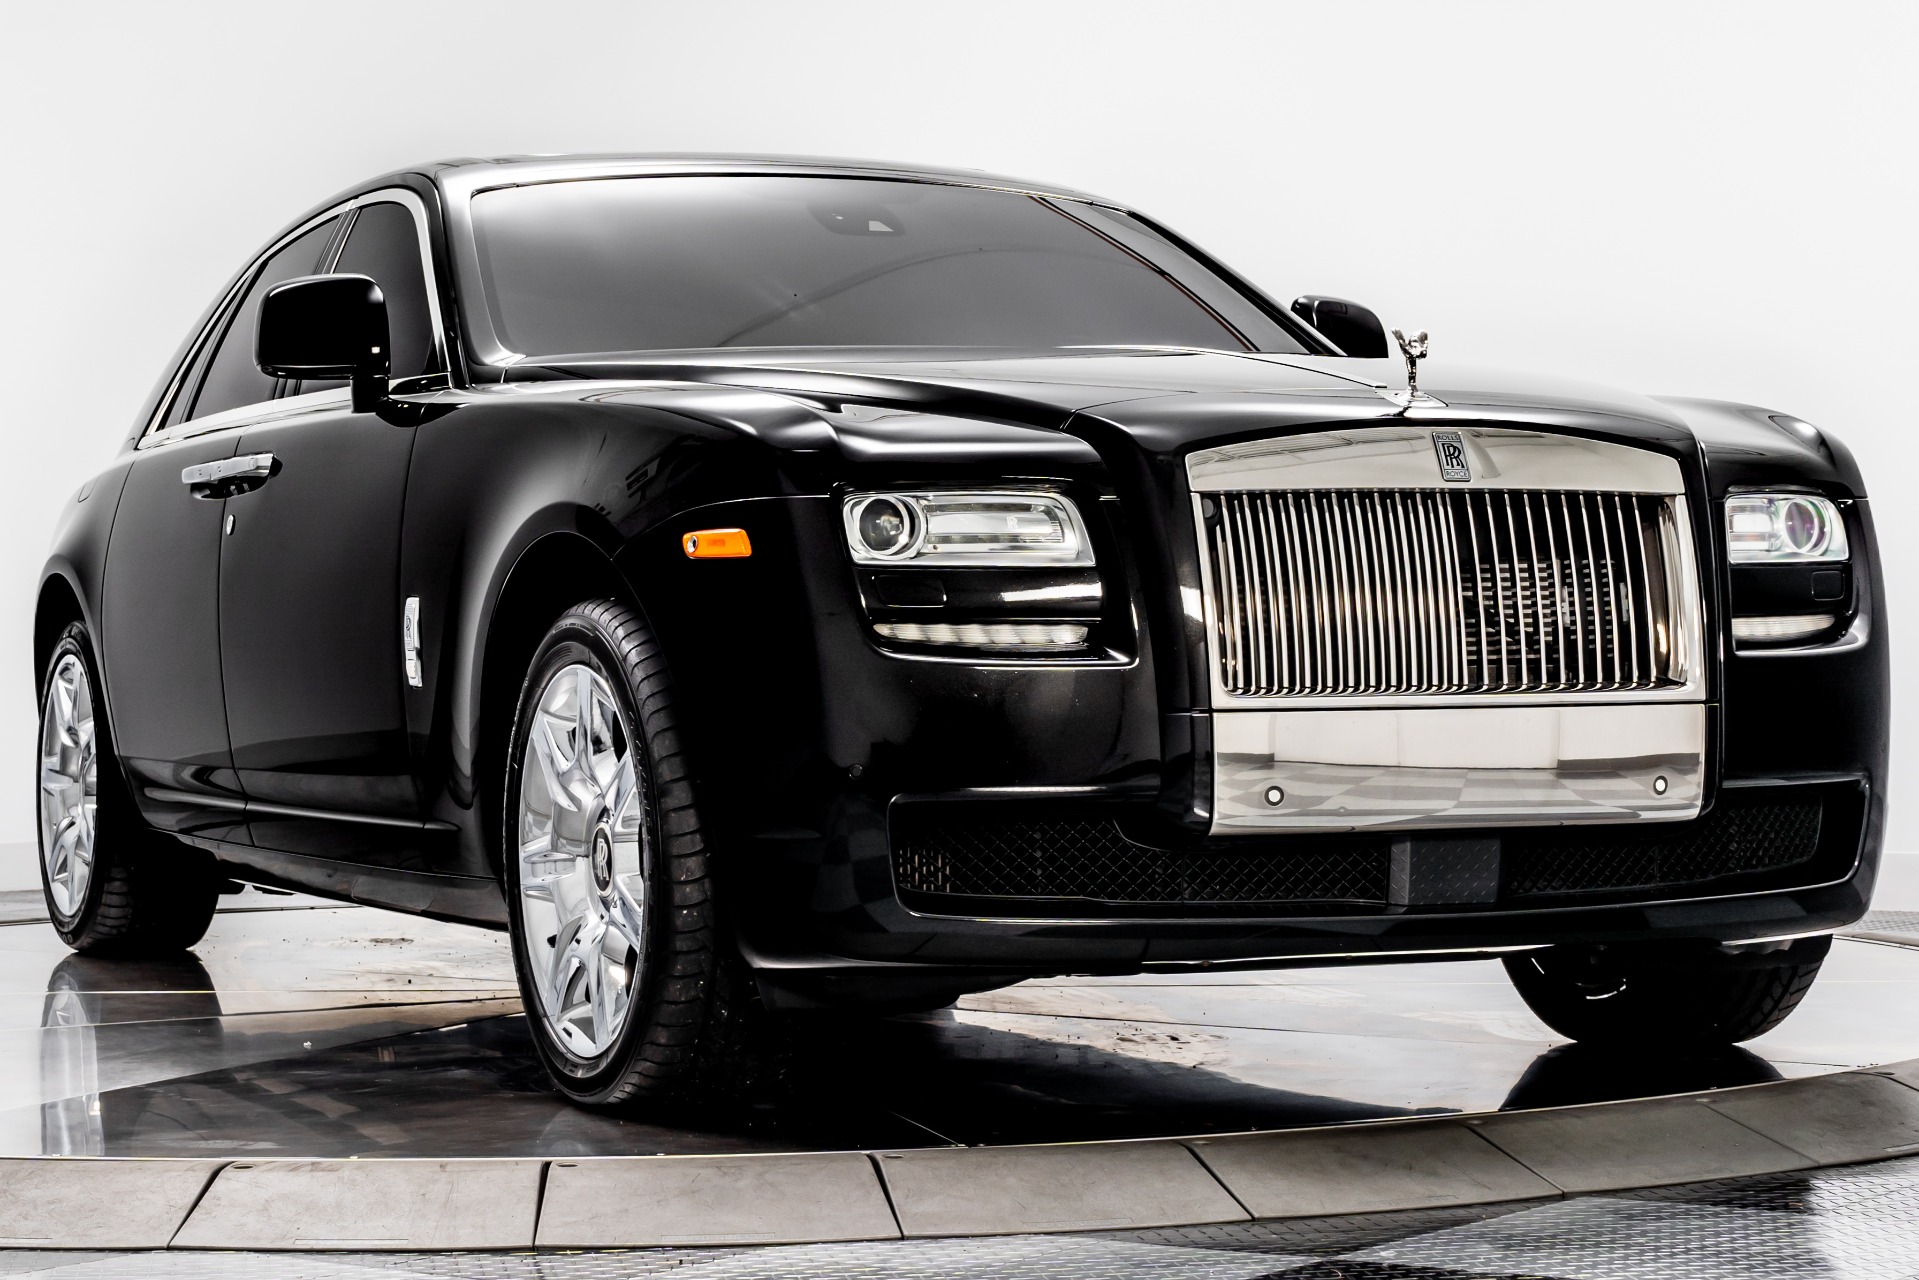 First Drive: 2011 Rolls-Royce Ghost